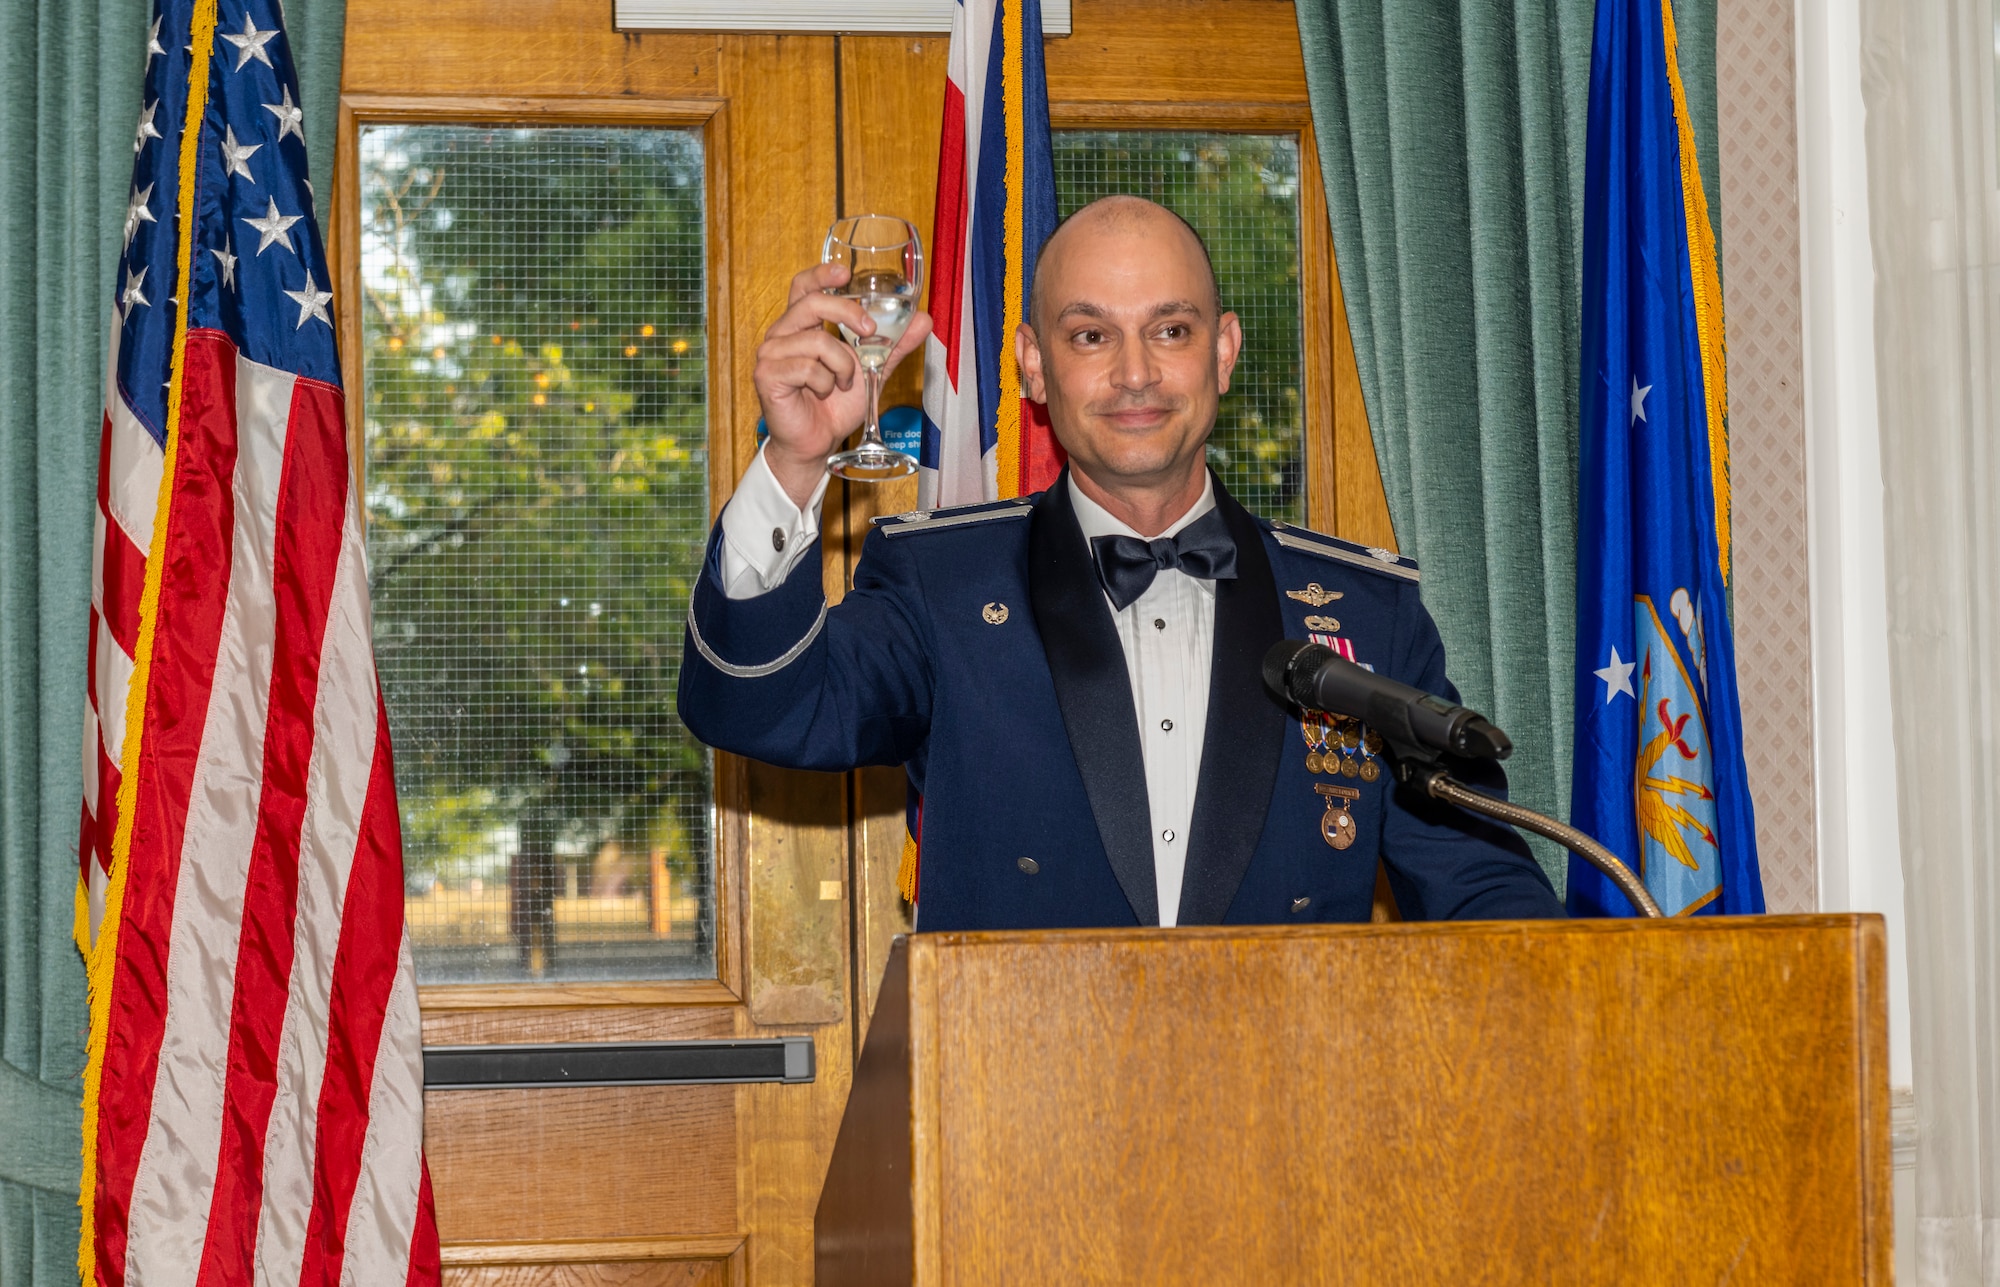 U.S. Air Force Lt. Col. Jonathan Beha, 95th Reconnaissance Squadron commander, raises a toast during the 95th RS’s 105th anniversary celebration at Royal Air Force Mildenhall, England, Aug. 19, 2022. Since 1917, the 95th RS has played a vital role in nearly every major conflict, with one of their most notable roles being as a bombardment squadron in the Doolittle Raid of 1942.